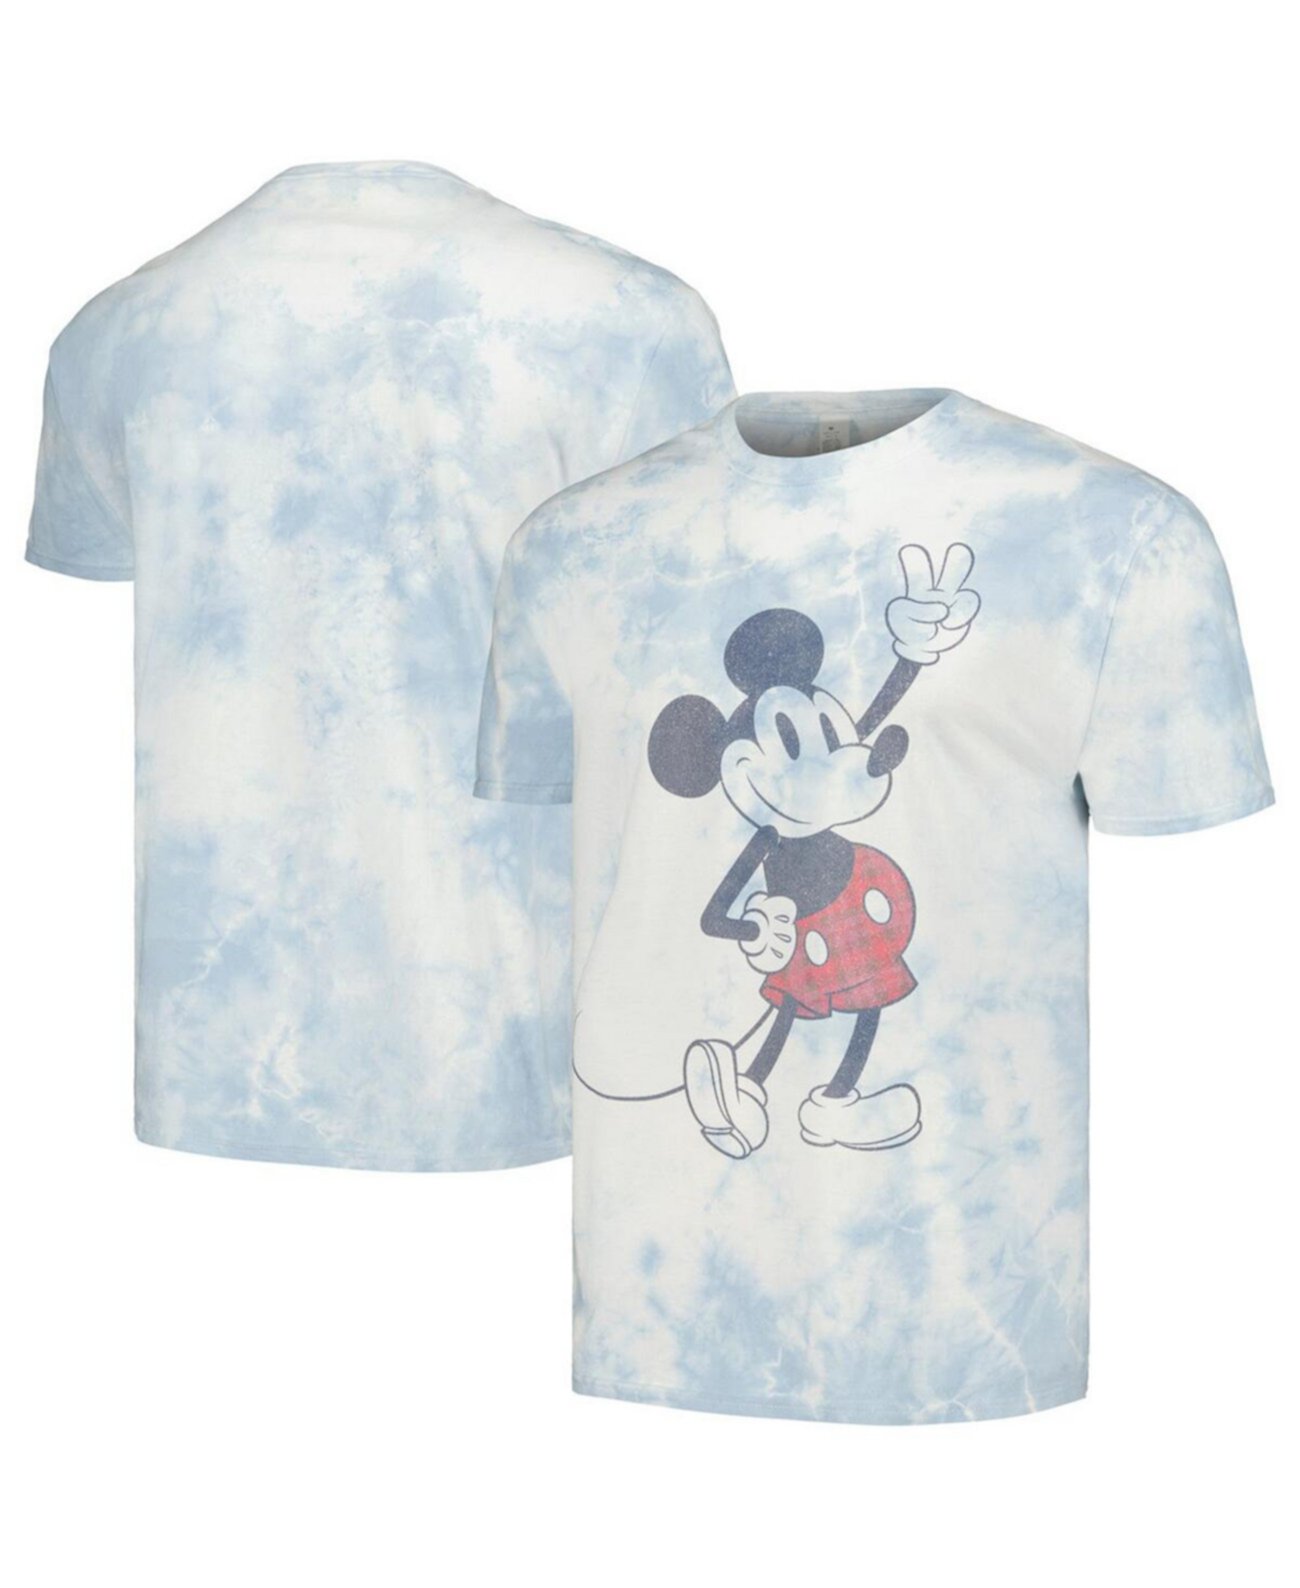 Men's and Women's White Mickey & Friends Plaid Graphic T-shirt Mad Engine